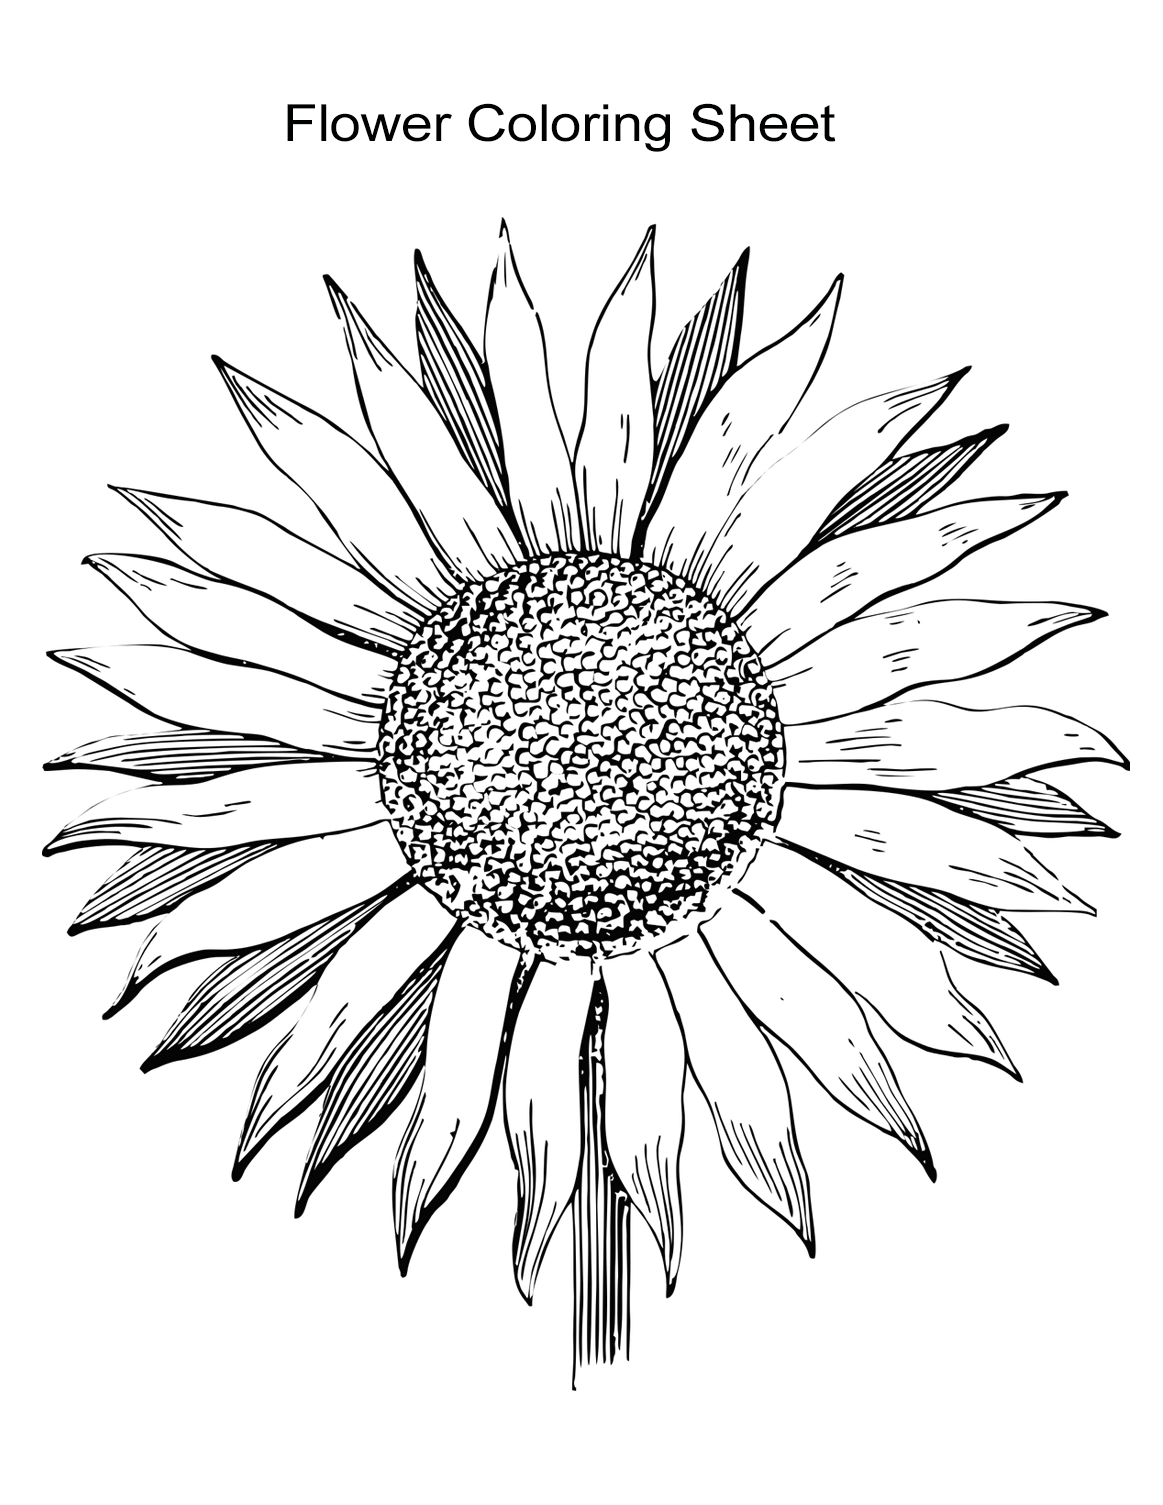 10 Flower Coloring Sheets For Girls And Boys ALL ESL